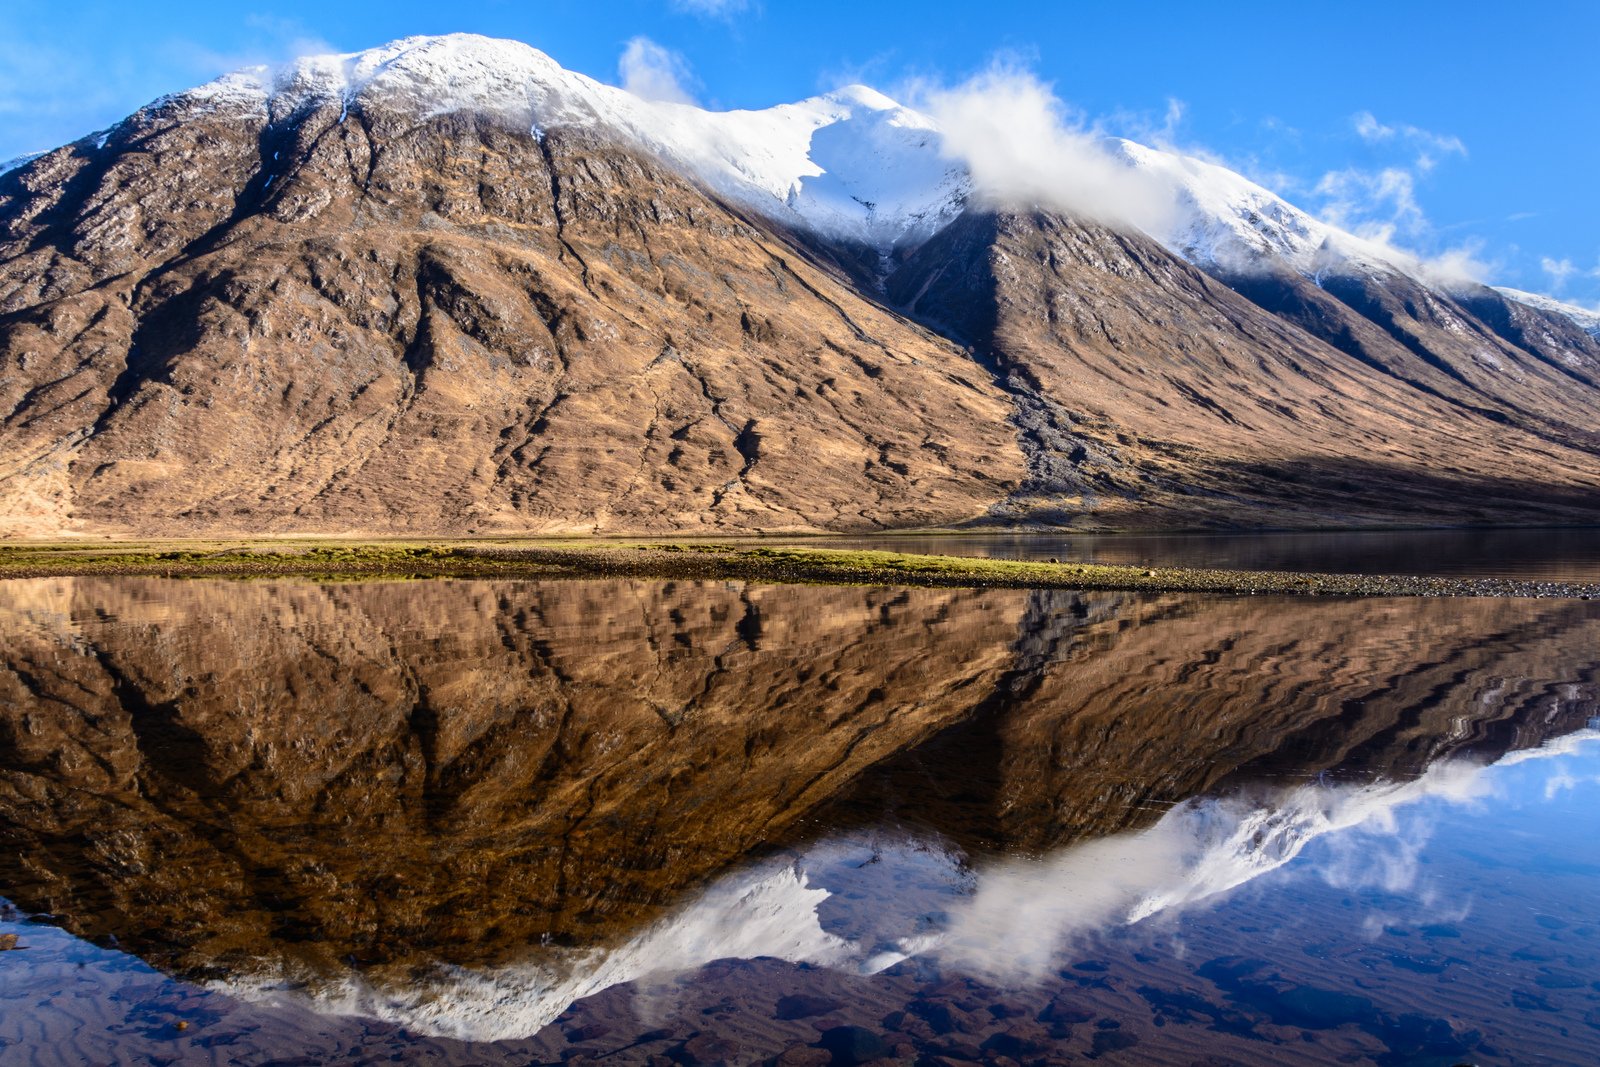 The beautiful Loch Etive in the Scottish Highlands